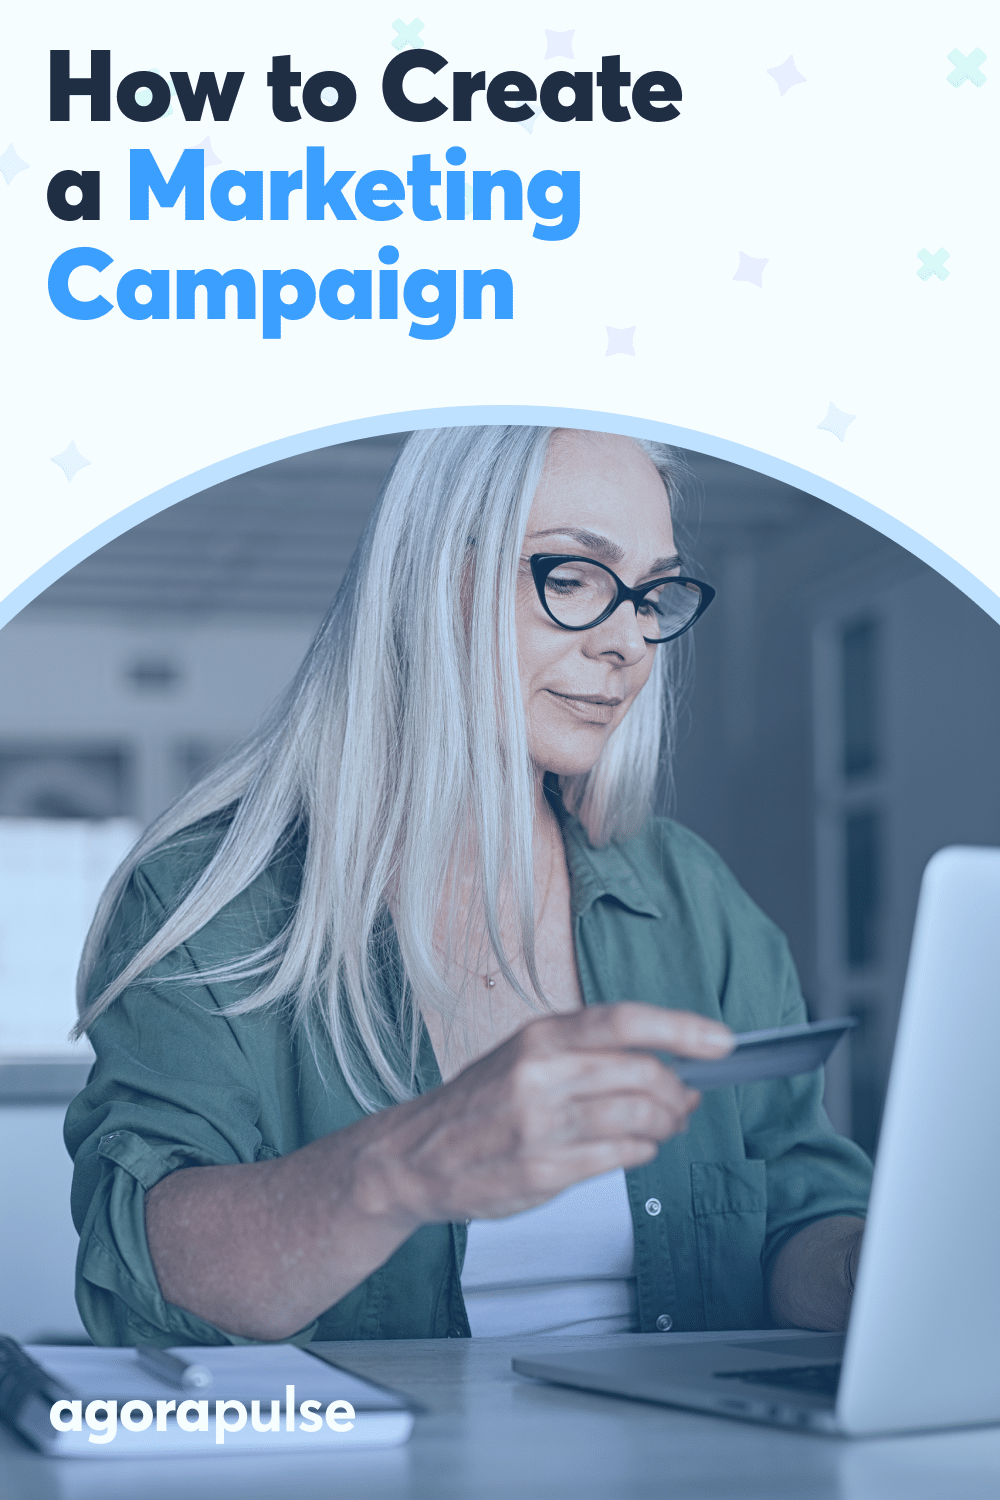 How to Create a Marketing Campaign: 12 Steps + Actionable Tips